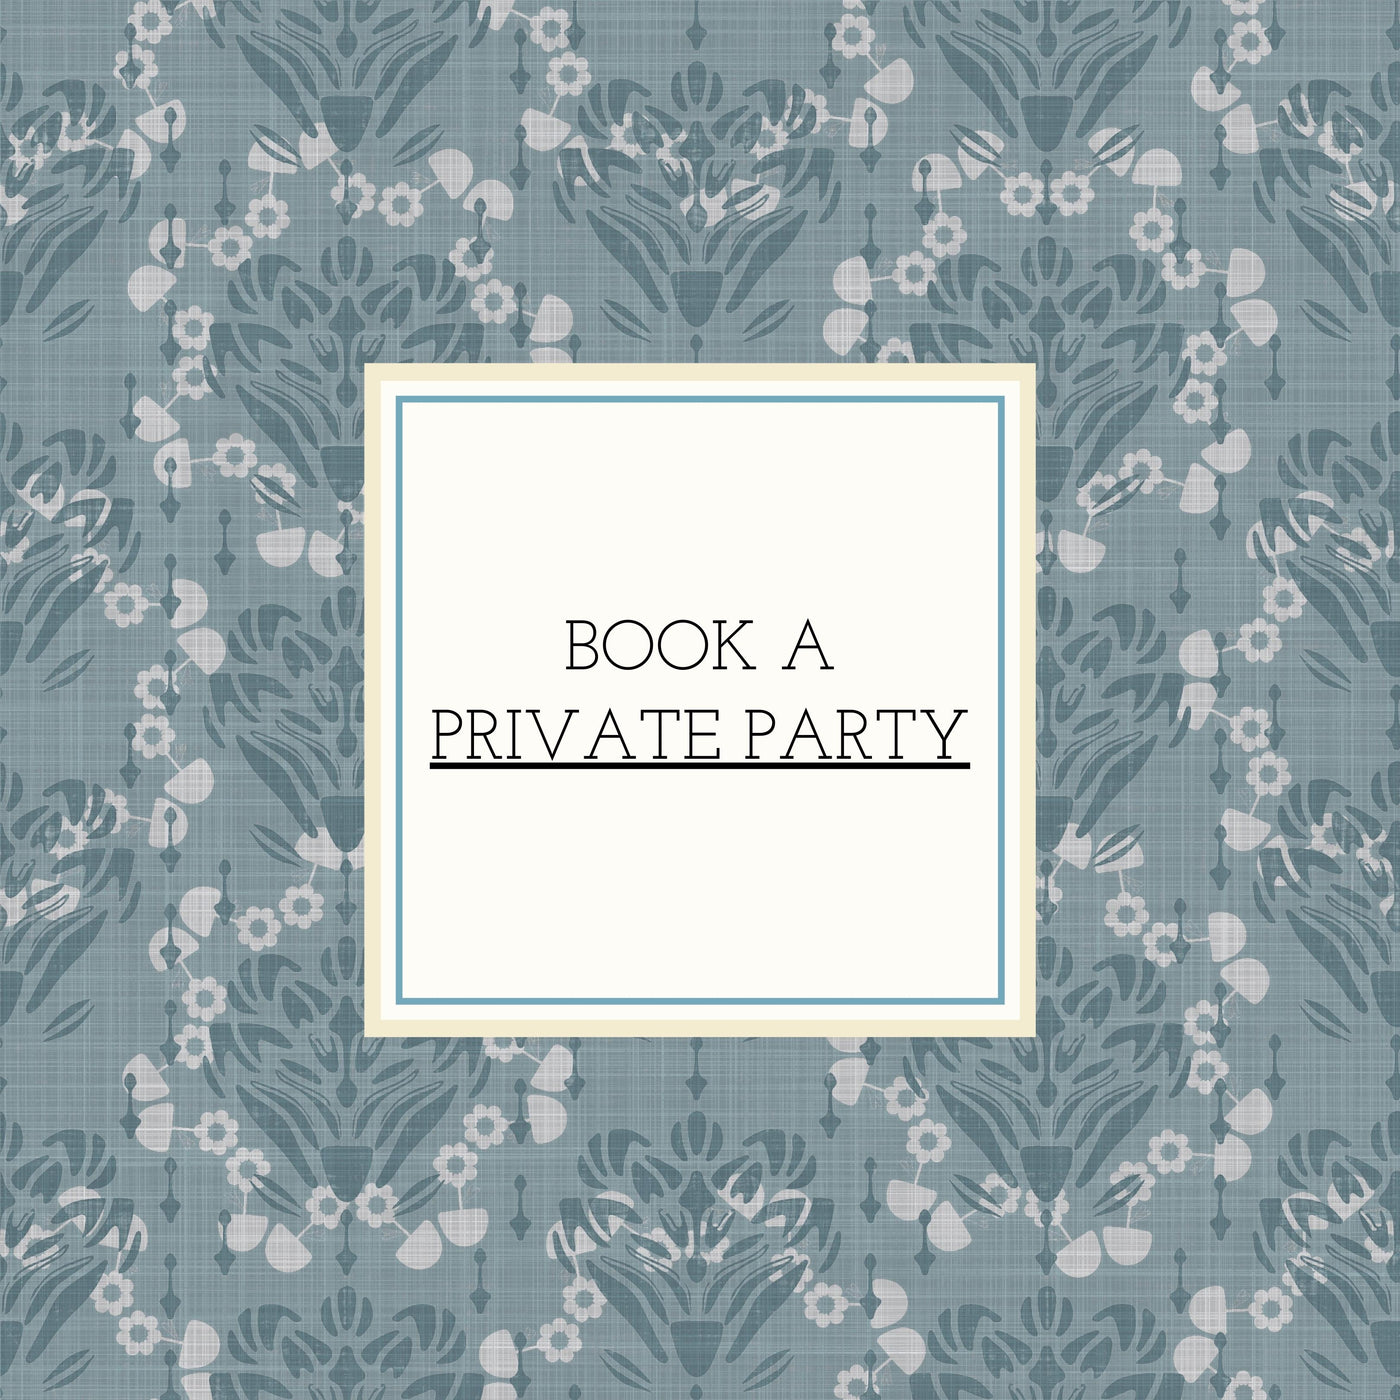 BOOK A PRIVATE PARTY